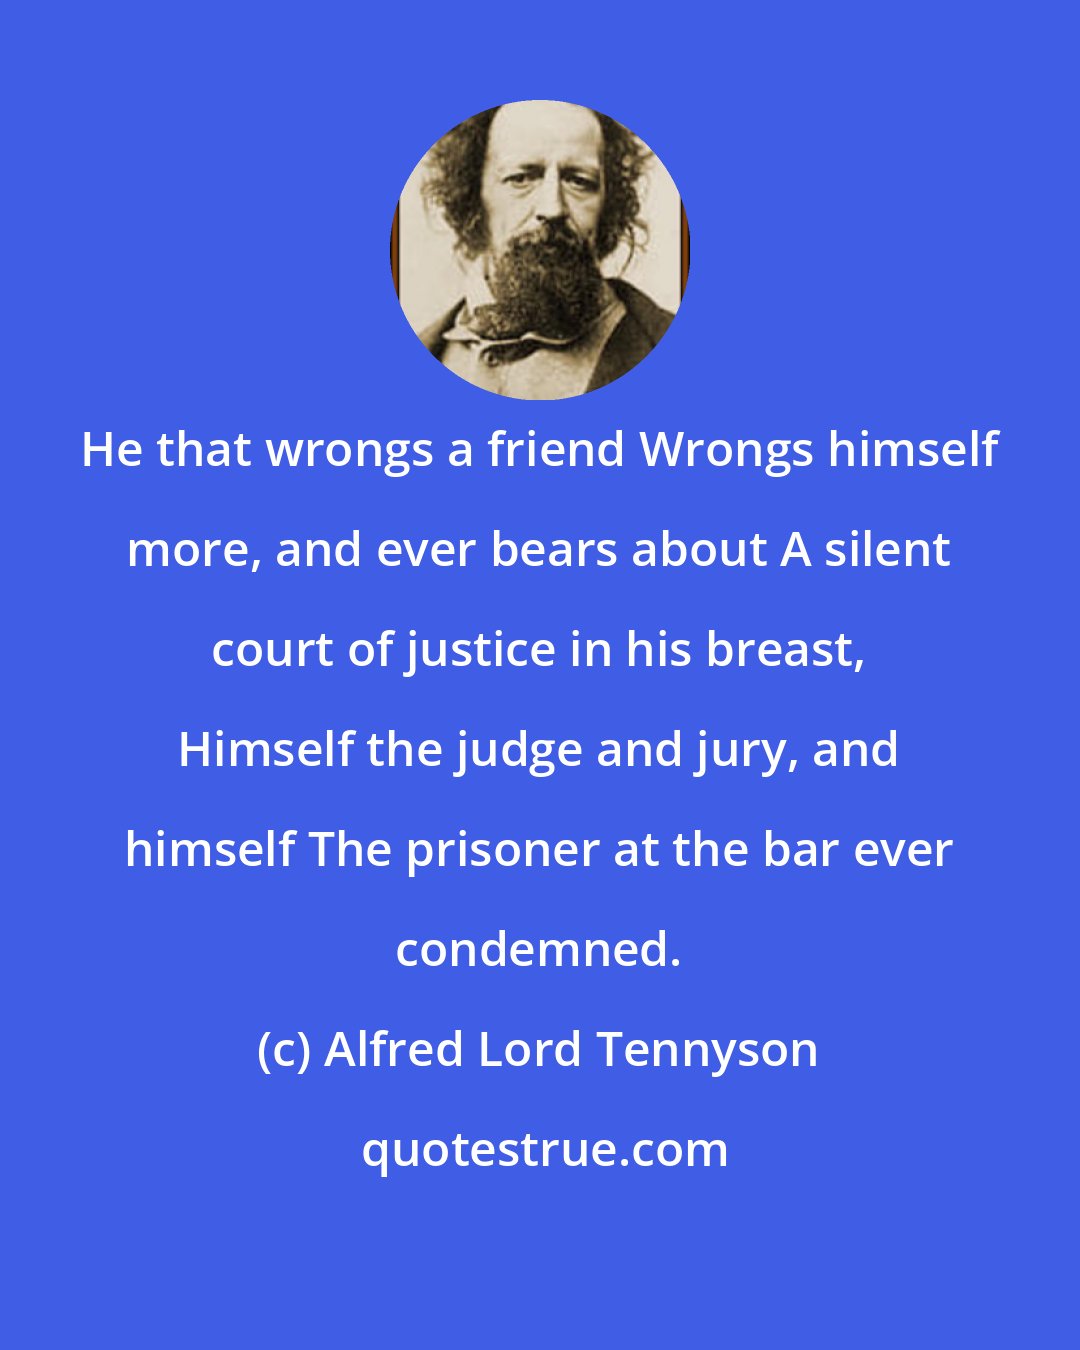 Alfred Lord Tennyson: He that wrongs a friend Wrongs himself more, and ever bears about A silent court of justice in his breast, Himself the judge and jury, and himself The prisoner at the bar ever condemned.